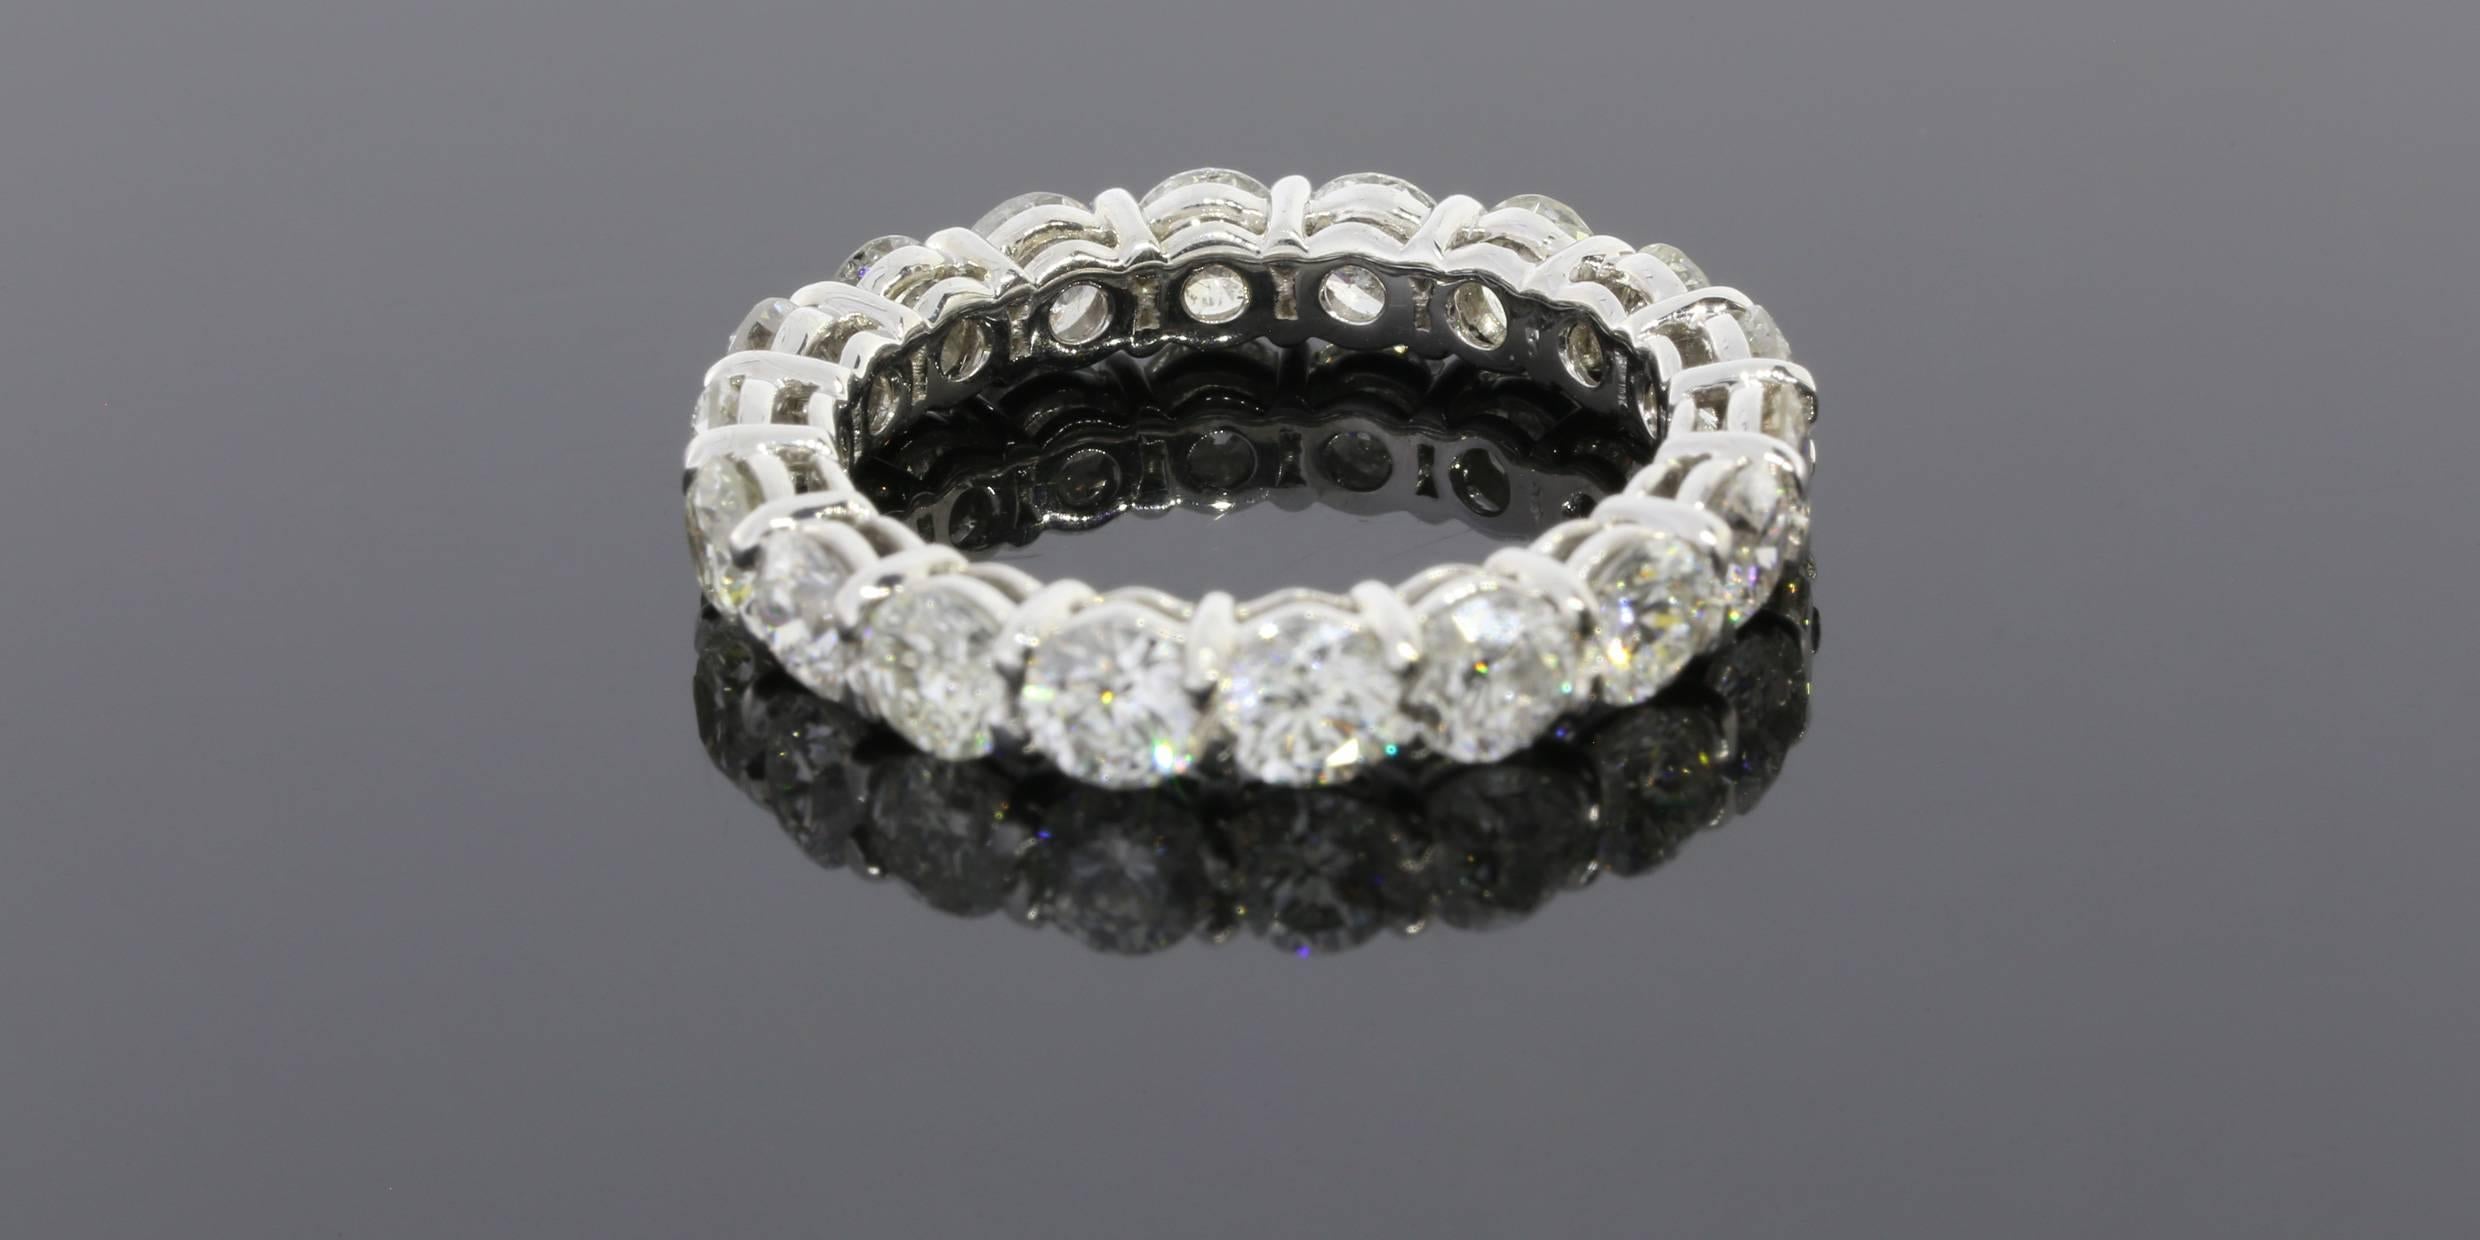 This classic band is a beautiful 18 karat white gold diamond eternity band that can dress up any ring. It can be used as a wedding band, stand alone band, or stack ring. The ring has 18 round brilliant cut diamonds that have a combined total weight